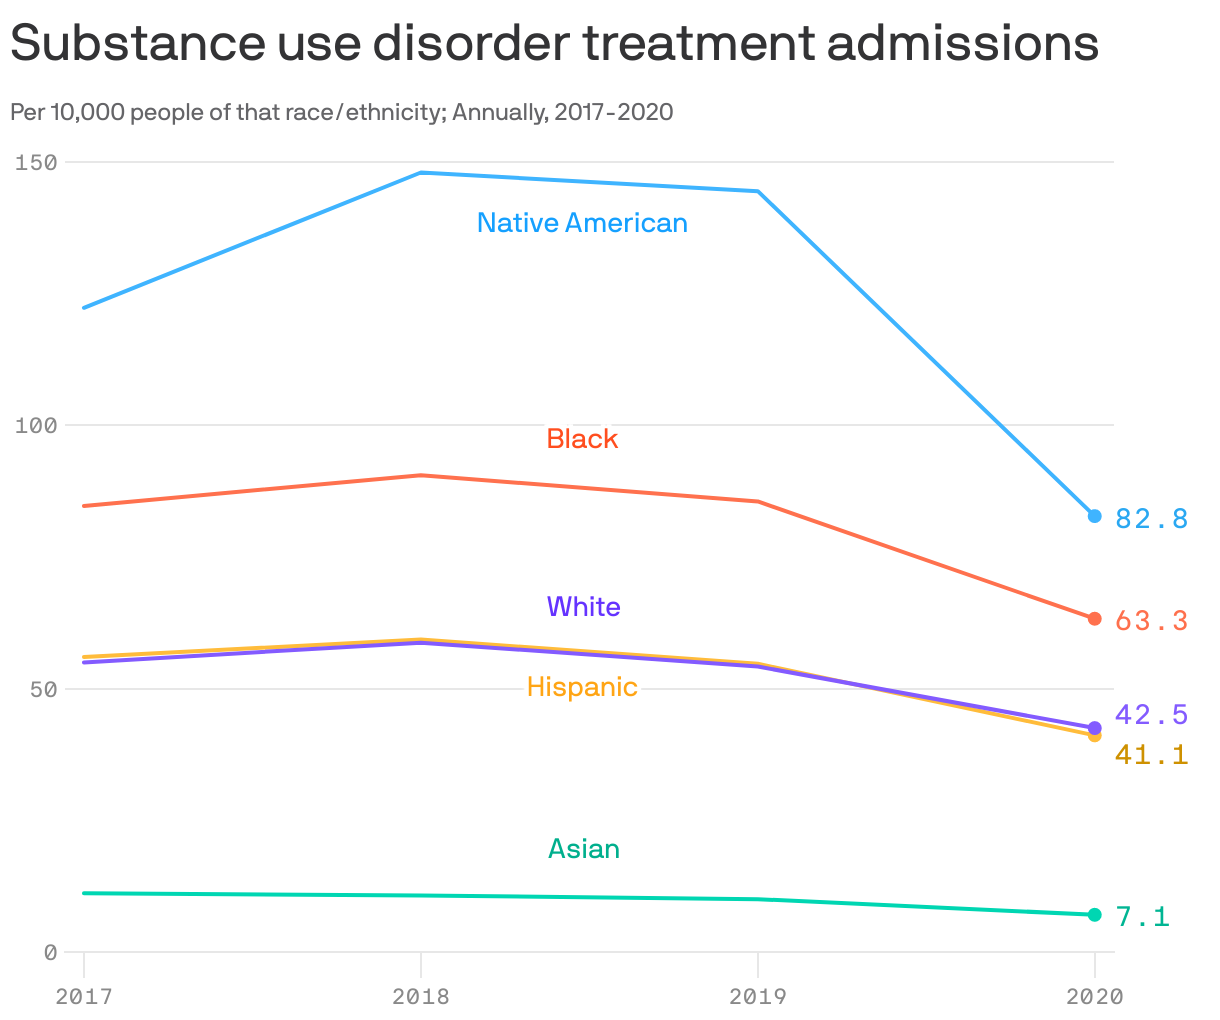 Substance use disorder treatment admissions